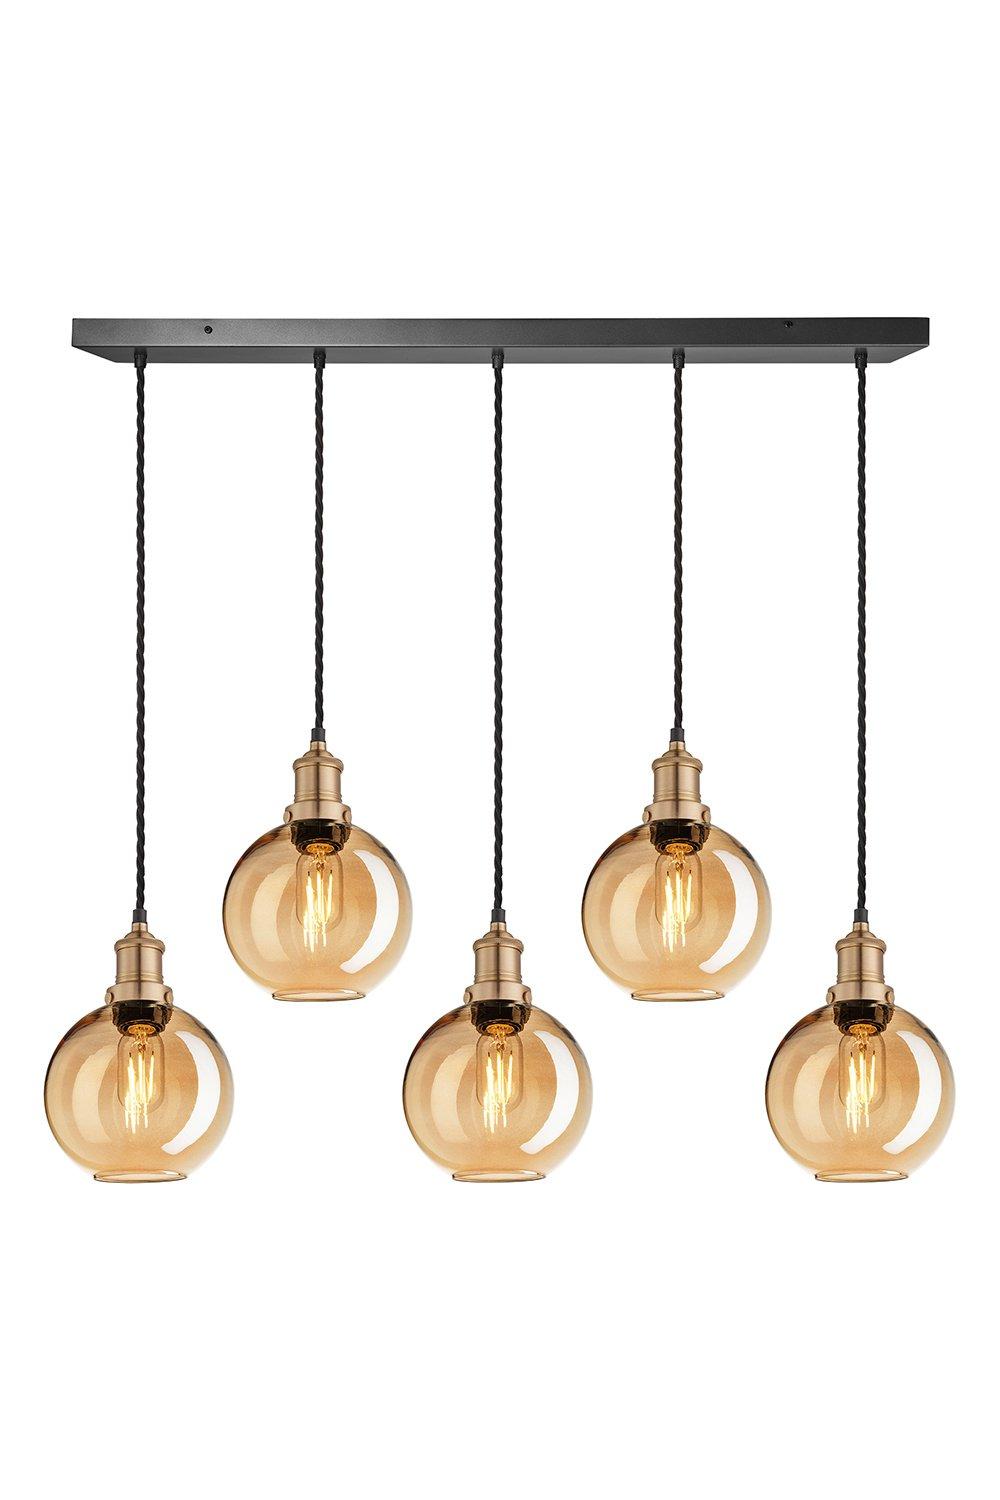 Brooklyn Tinted Glass Globe 5 Wire Cluster Lights, 7 inch, Amber, Brass holder